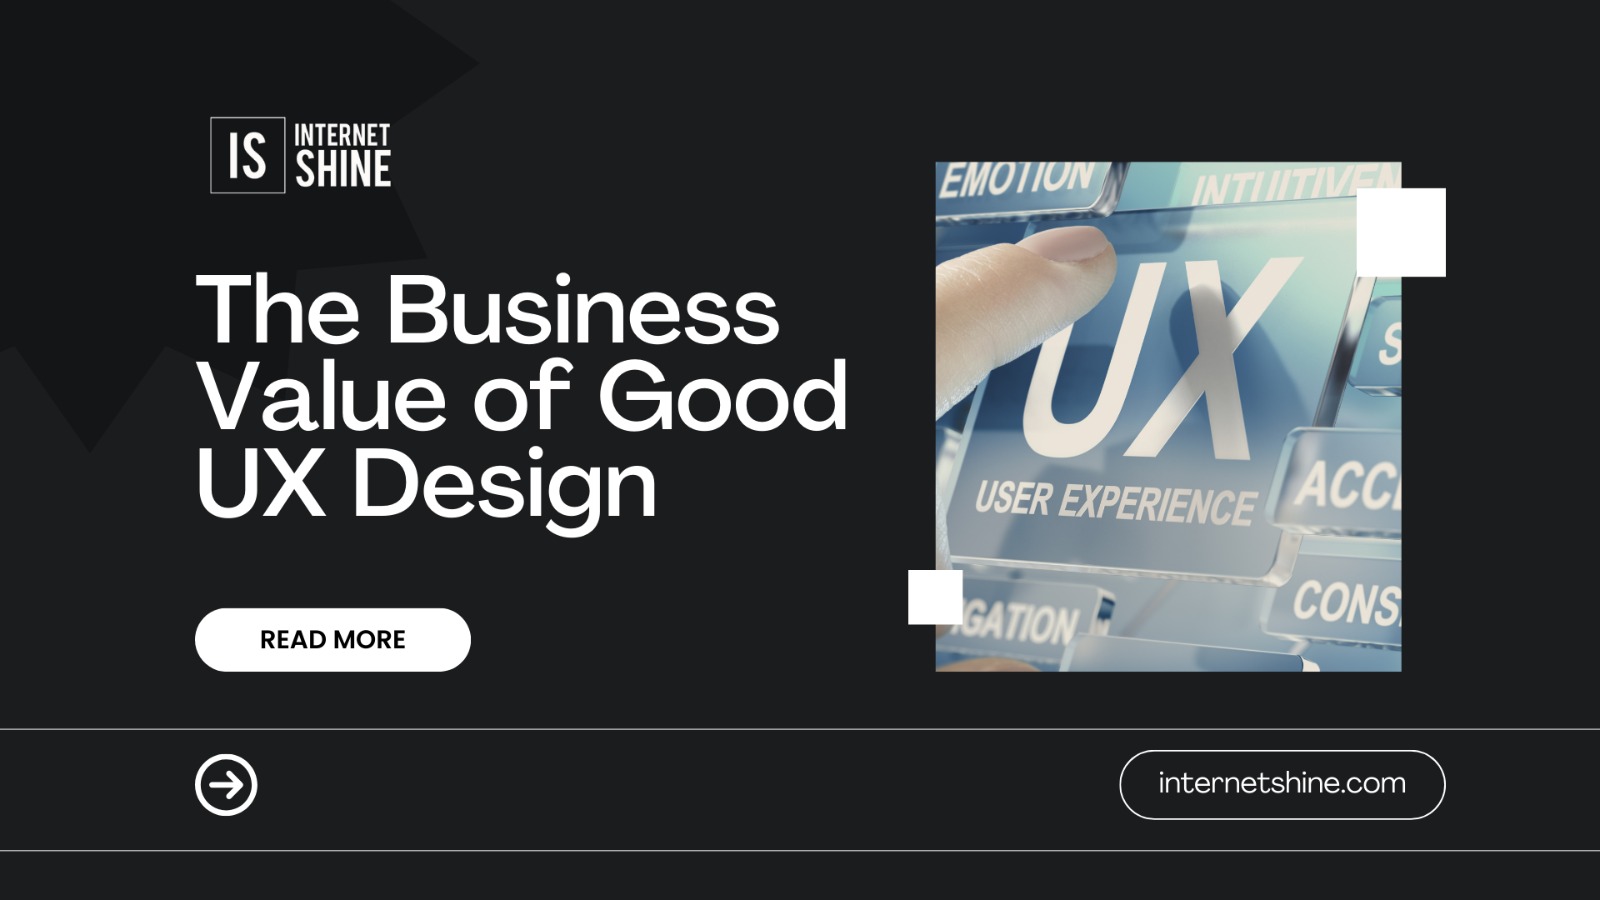 The Business Value of Good UX Design